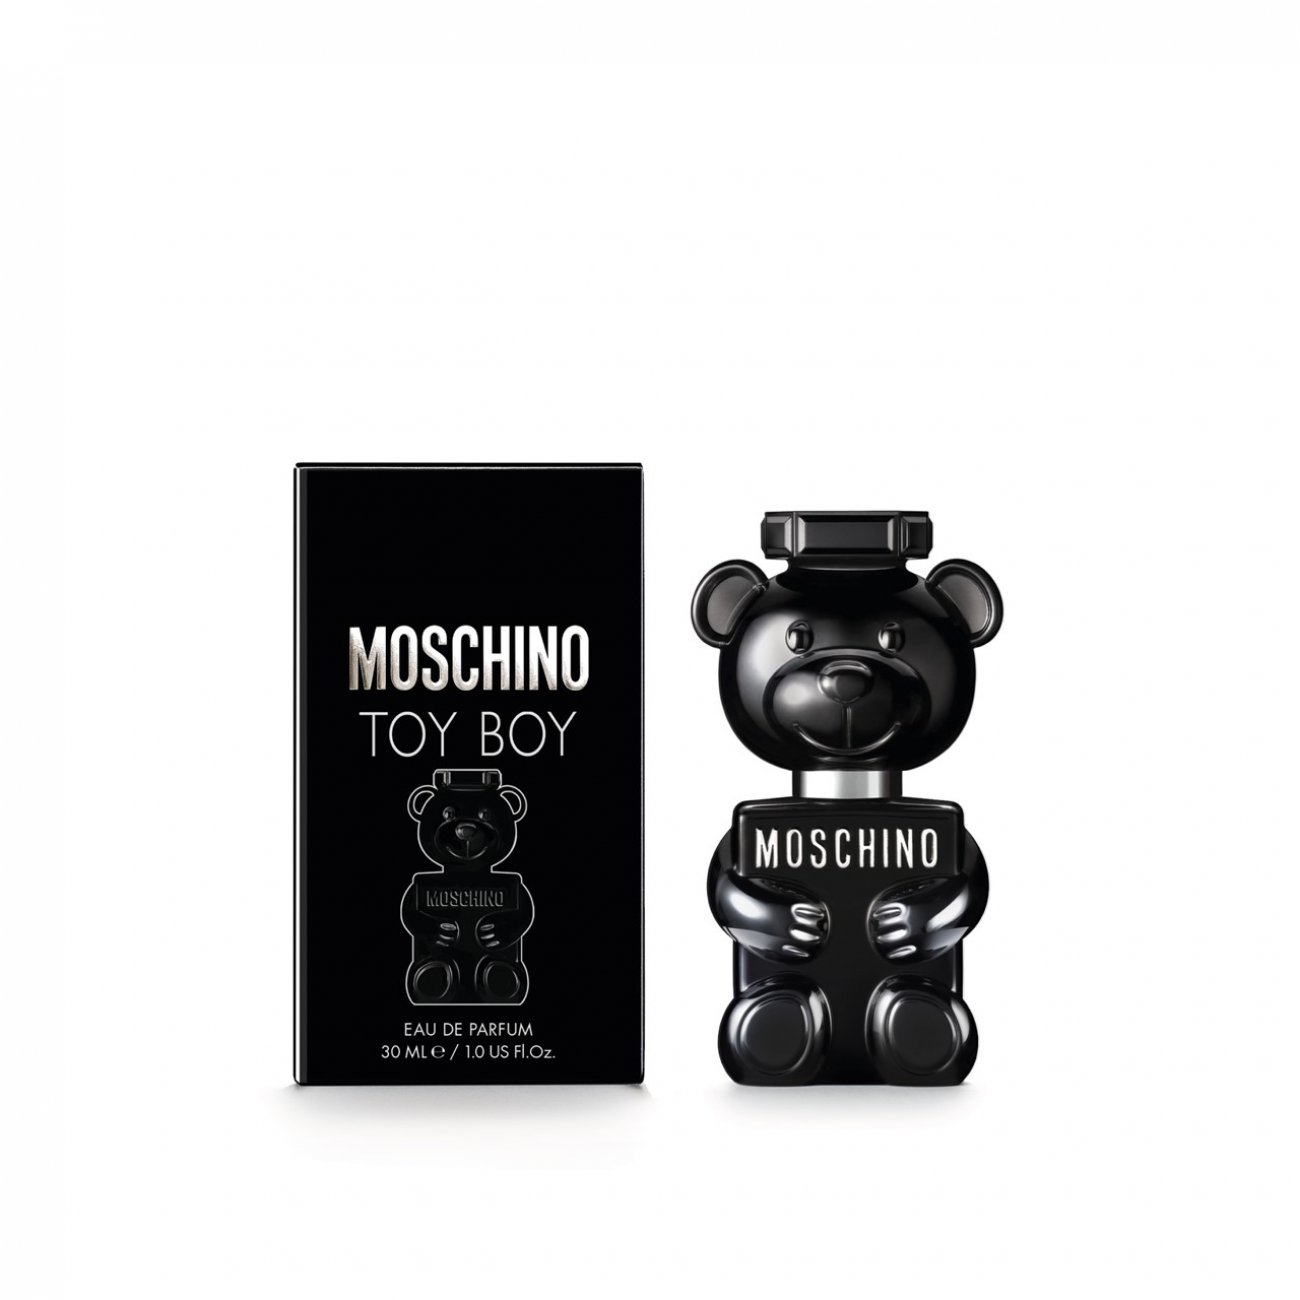 PERFUME MOSCHINO TOY BUBBLE GUM EDT PARA MUJER 100 ML ...